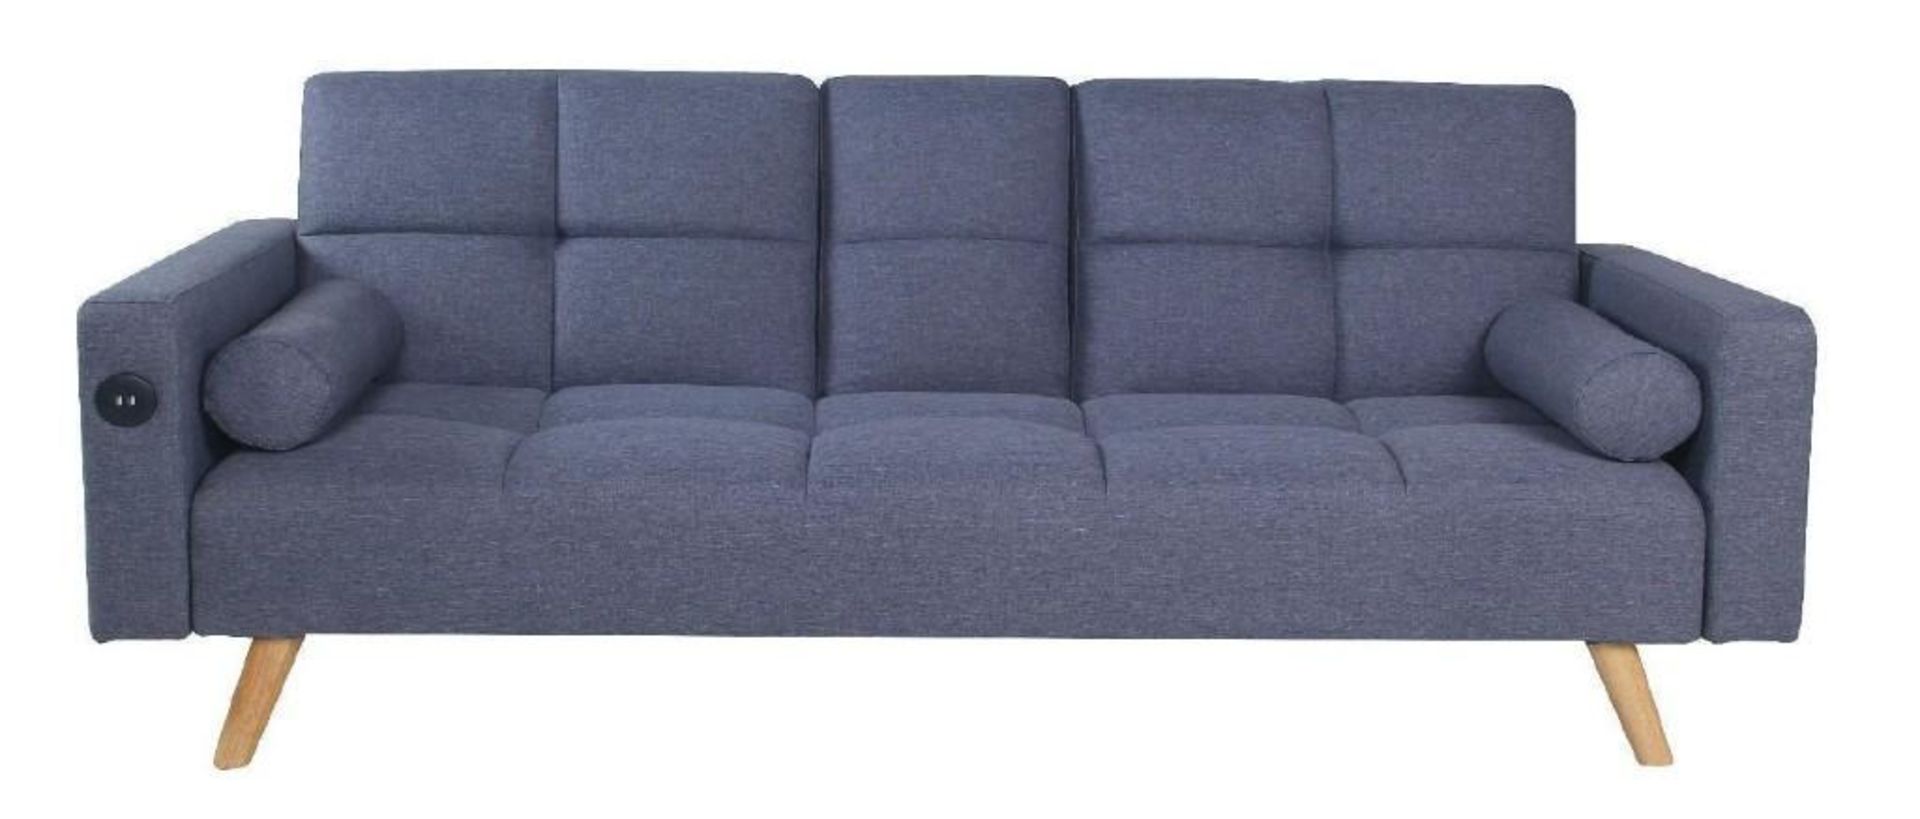 Brand new Boxed 2 Seater Clic Clac USB Sofa Bed - Image 3 of 10